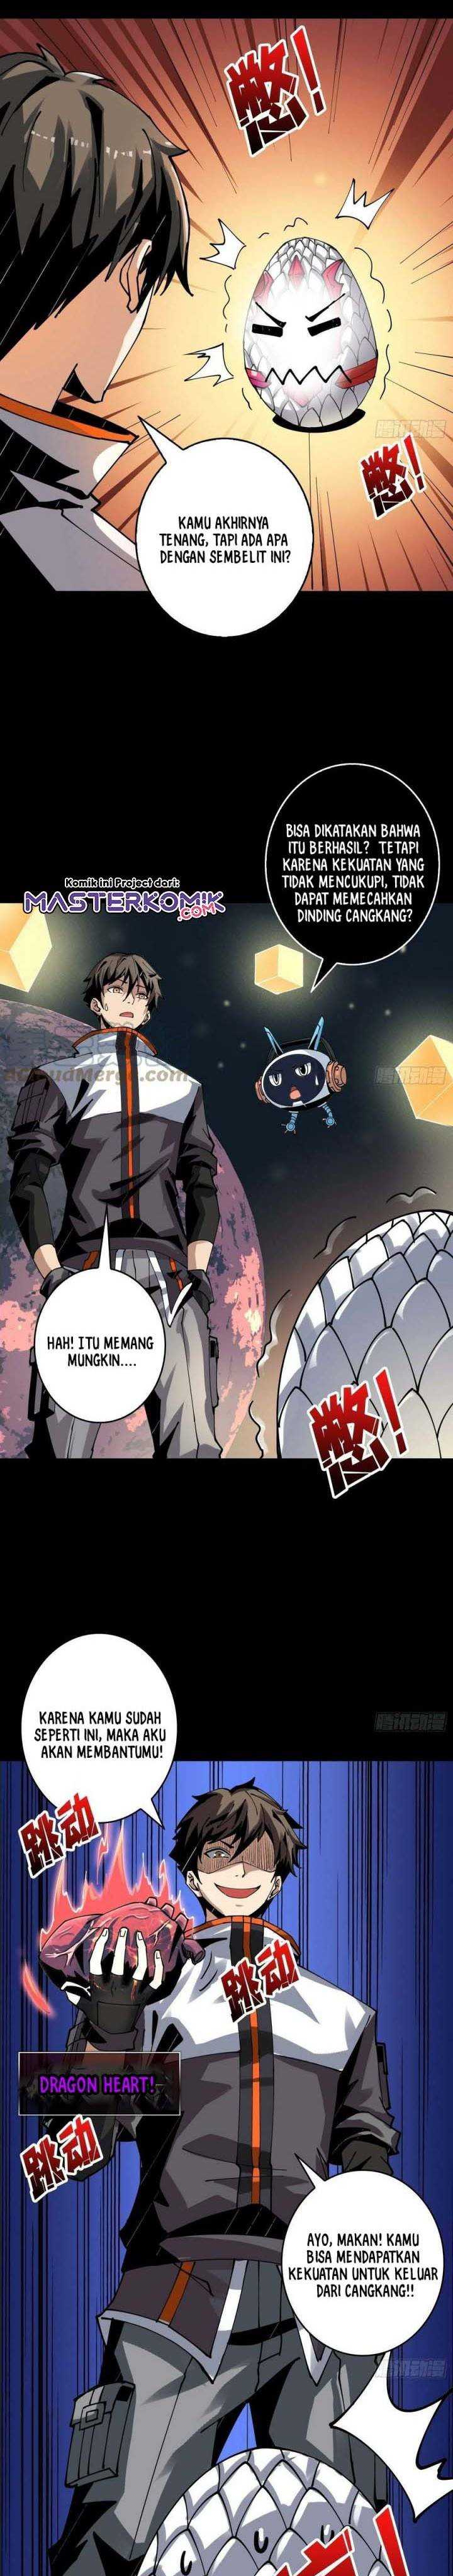 King Account At The Start Chapter 94